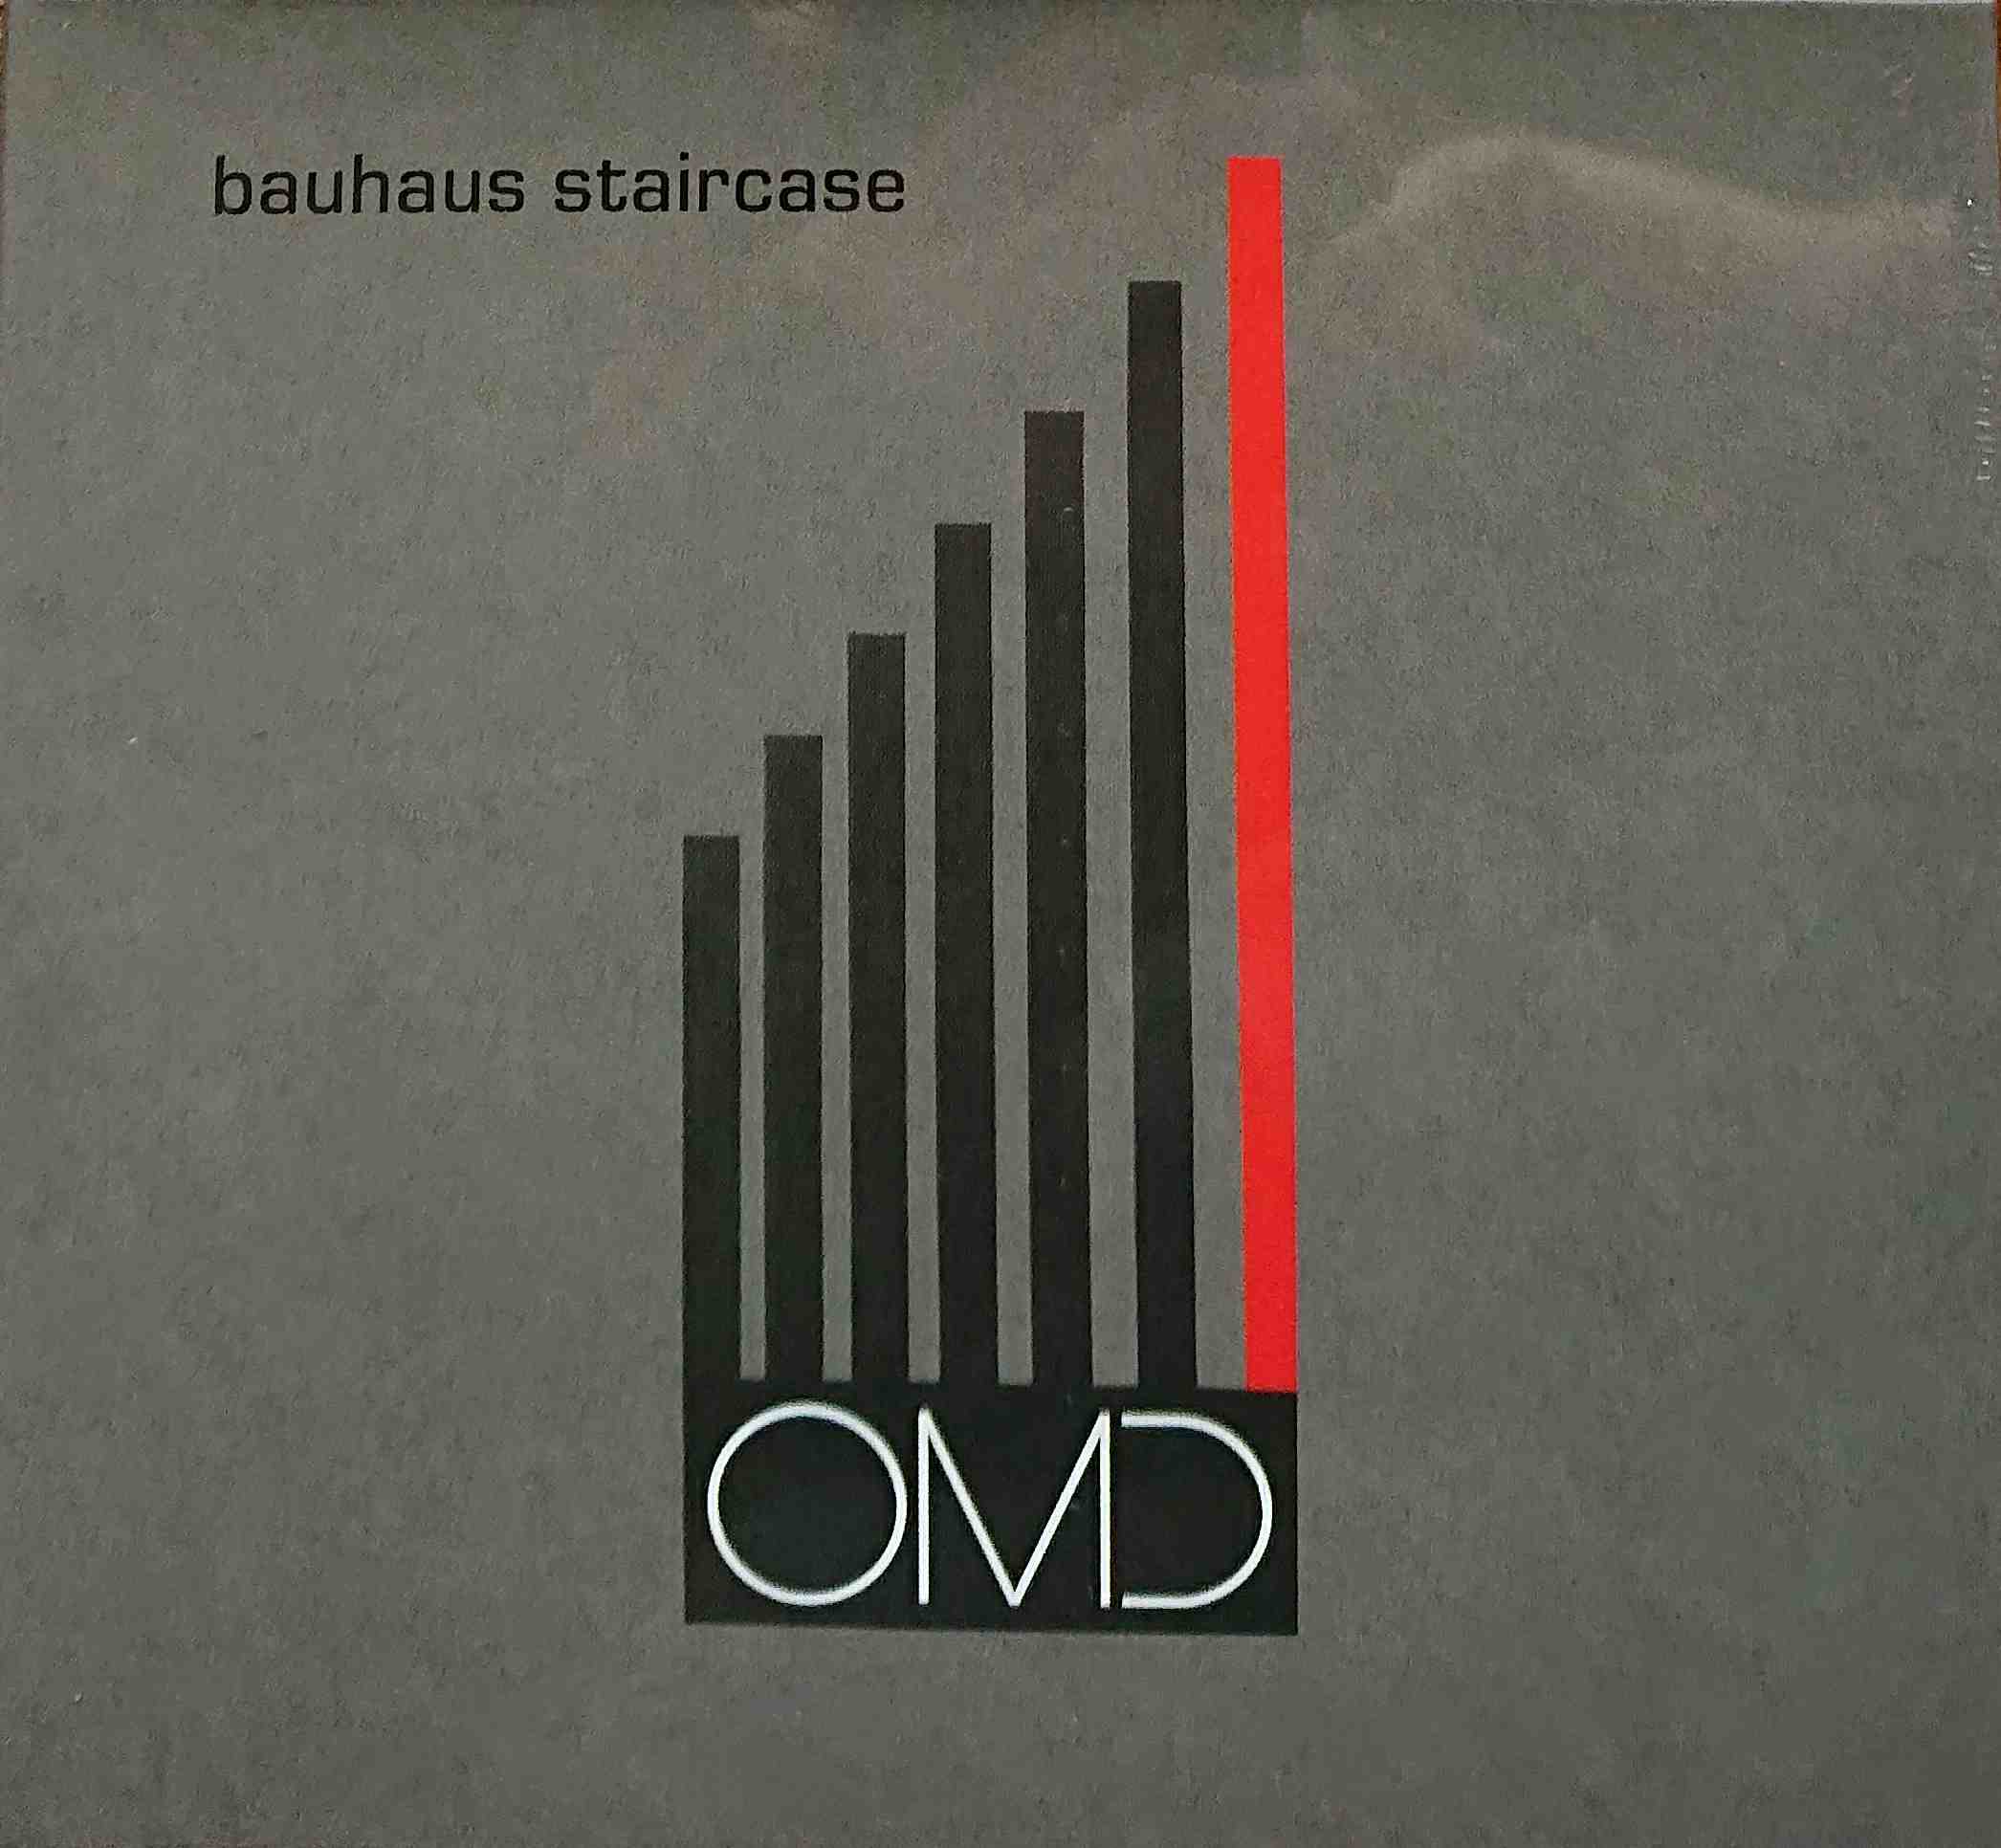 Picture of 100CD138 Bauhaus staircase by artist Orchestral Manoeuvres in the Dark